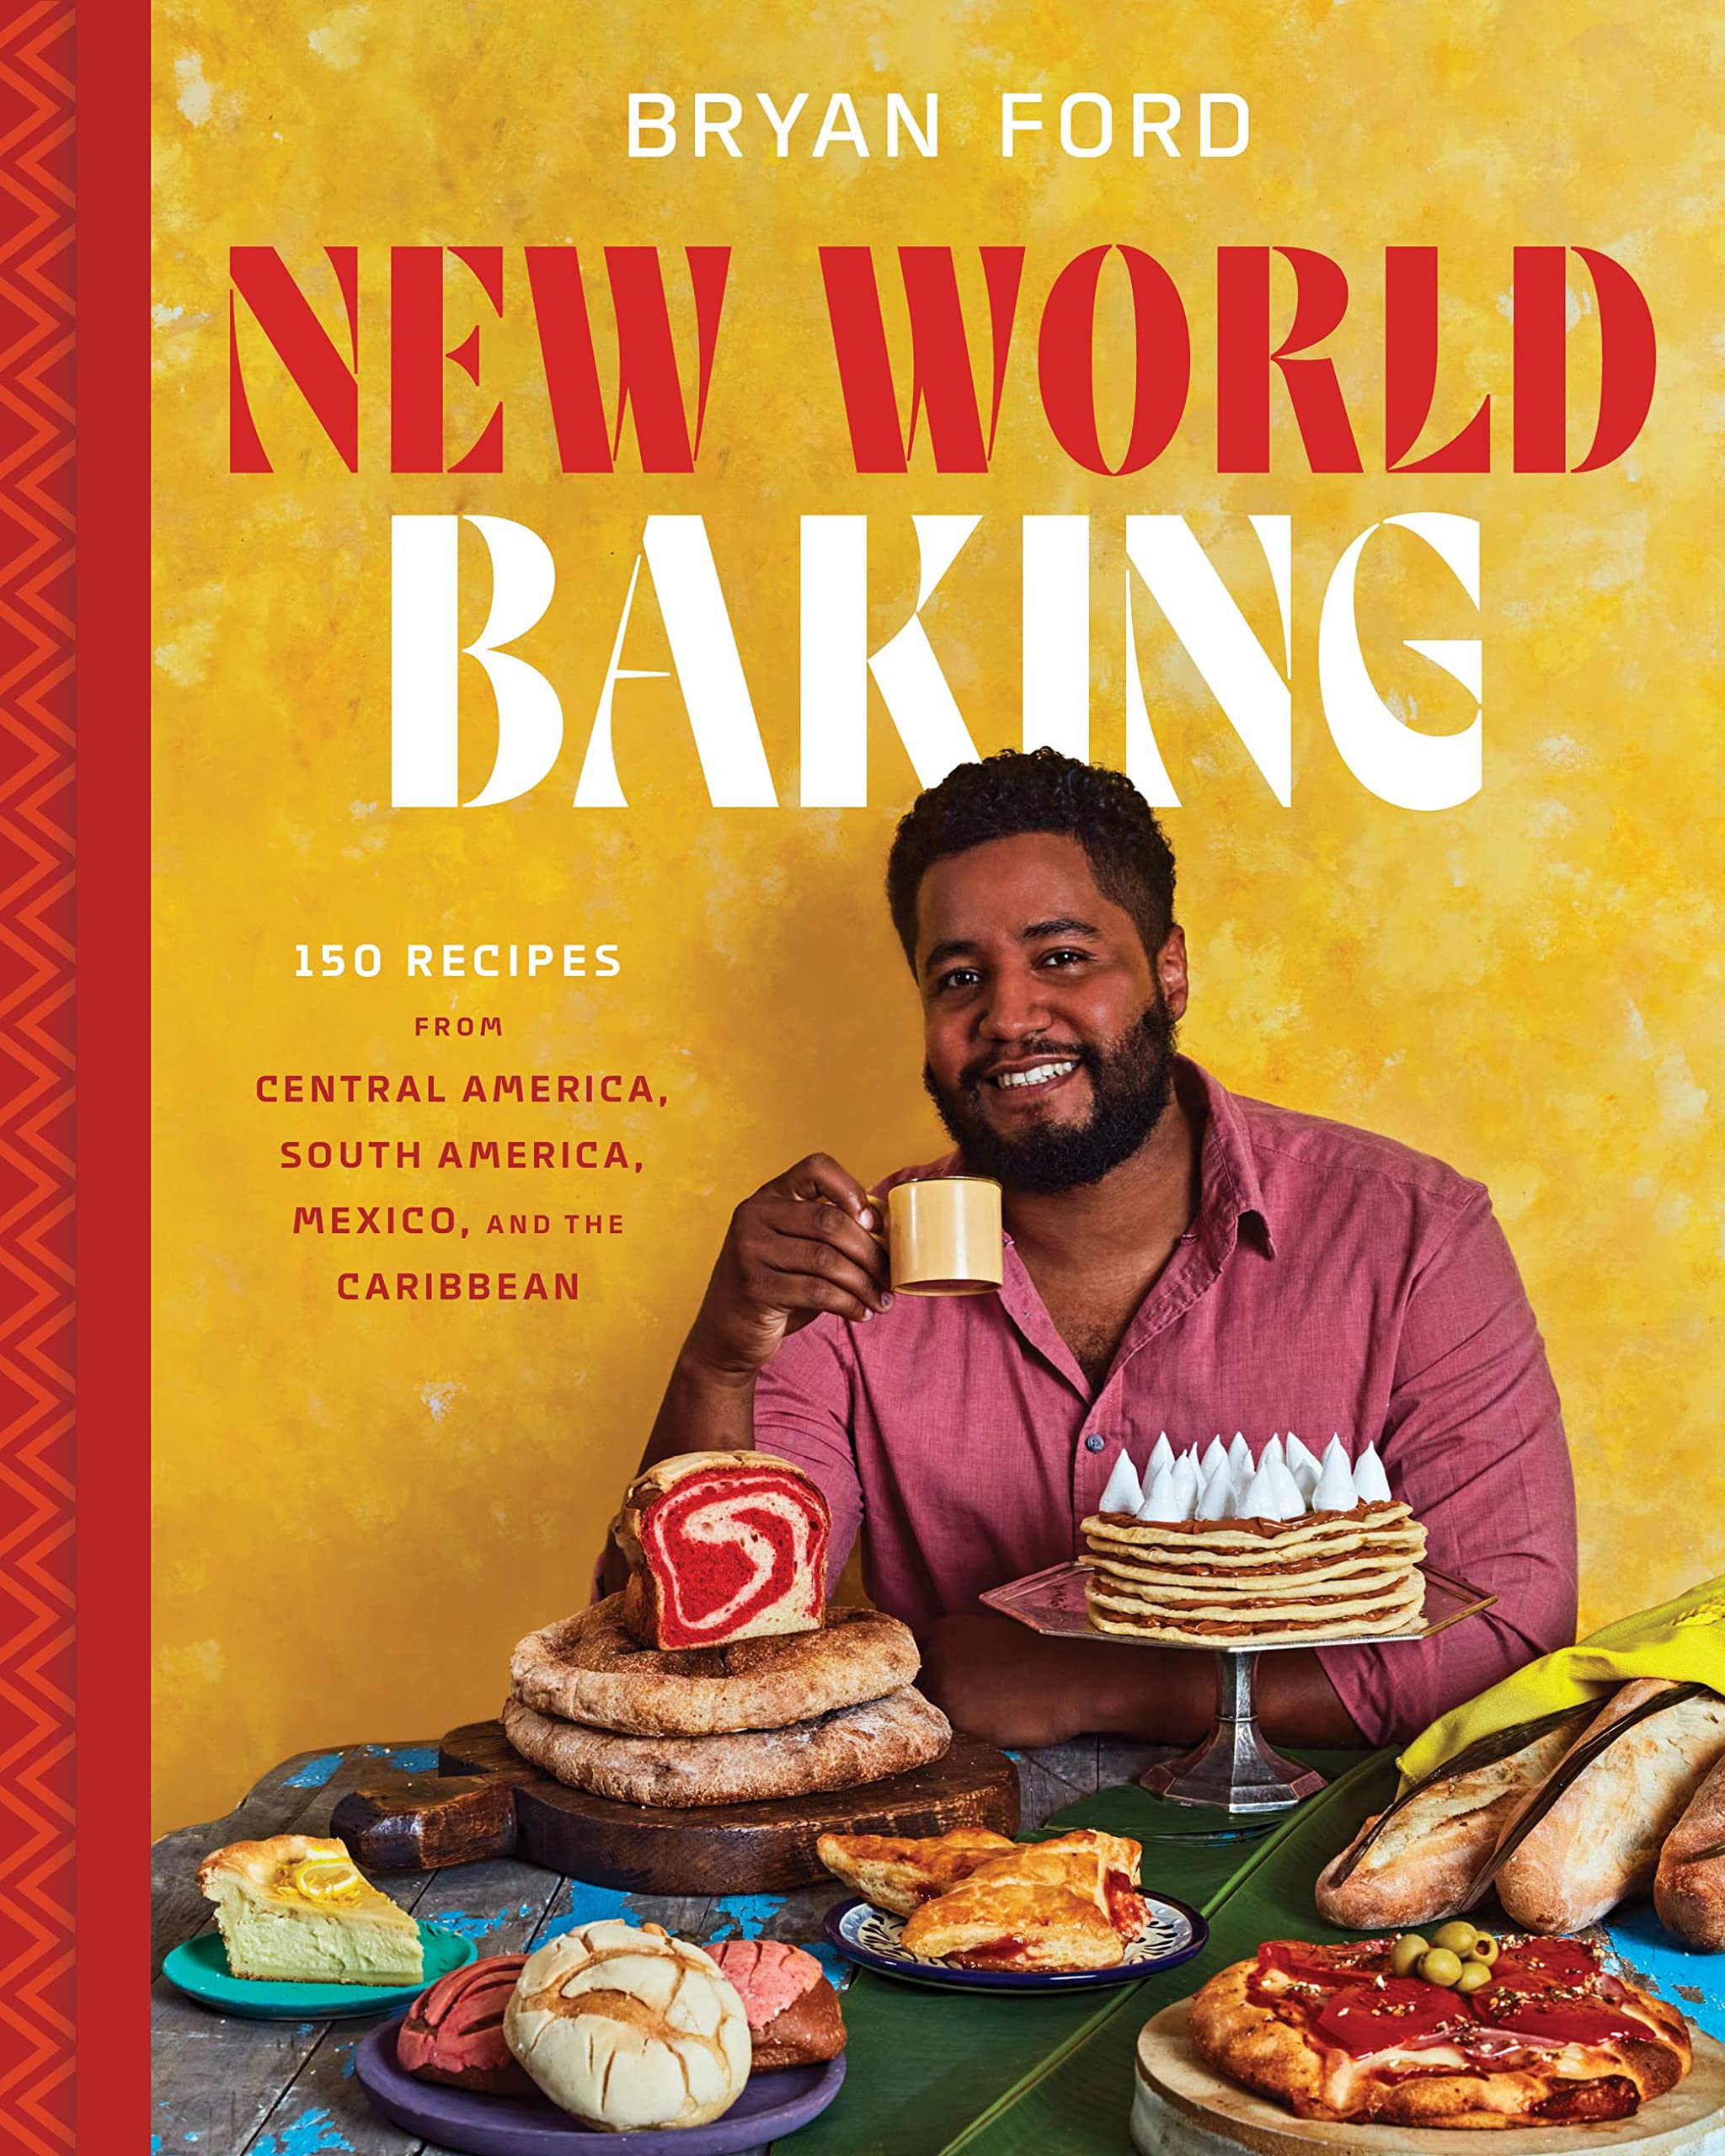 *Pre-order* New World Baking: 150 Recipes from Central America, South America, Mexico, and the Caribbean (Bryan Ford)